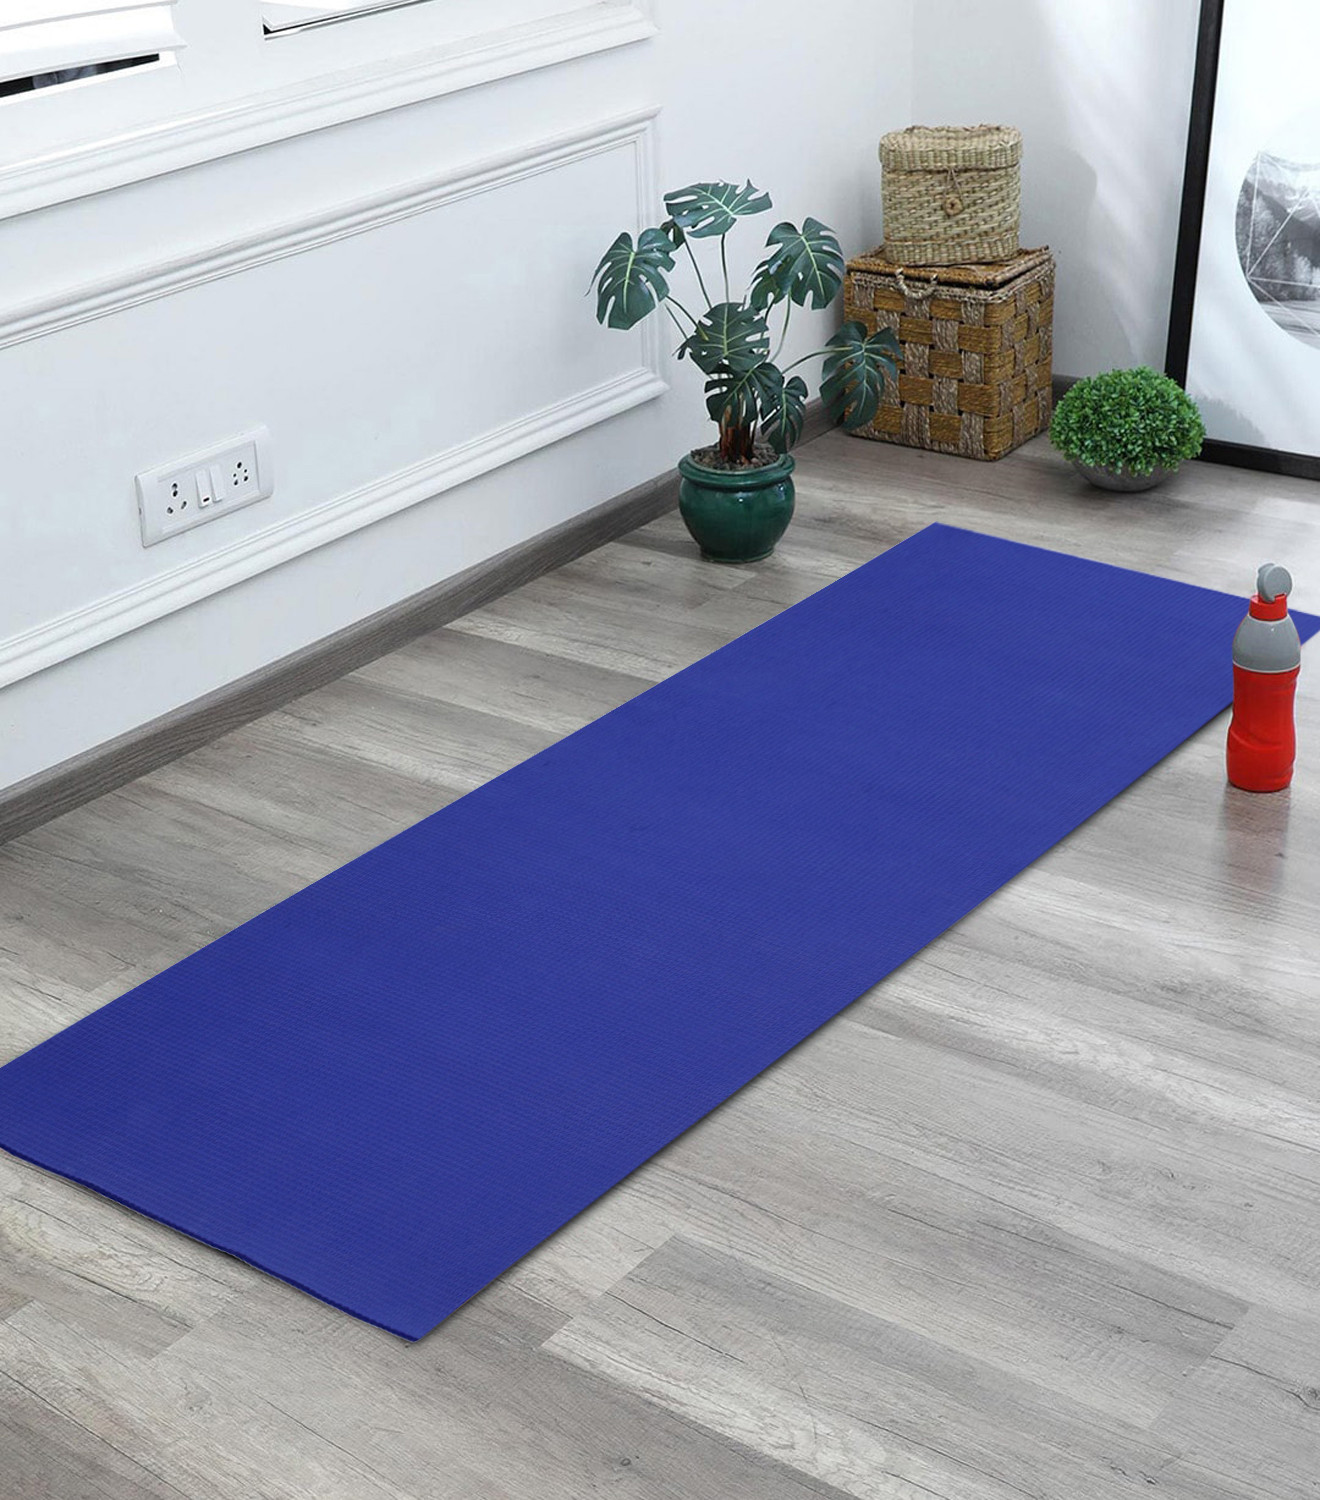 Kuber Industries 4 MM Extra Thick Yoga mat for Gym Workout and Flooring Exercise Long Size Yoga Mat for Men and Women, 6 x 2 Feet (Royal Blue)-33_S_KUBQMART11582